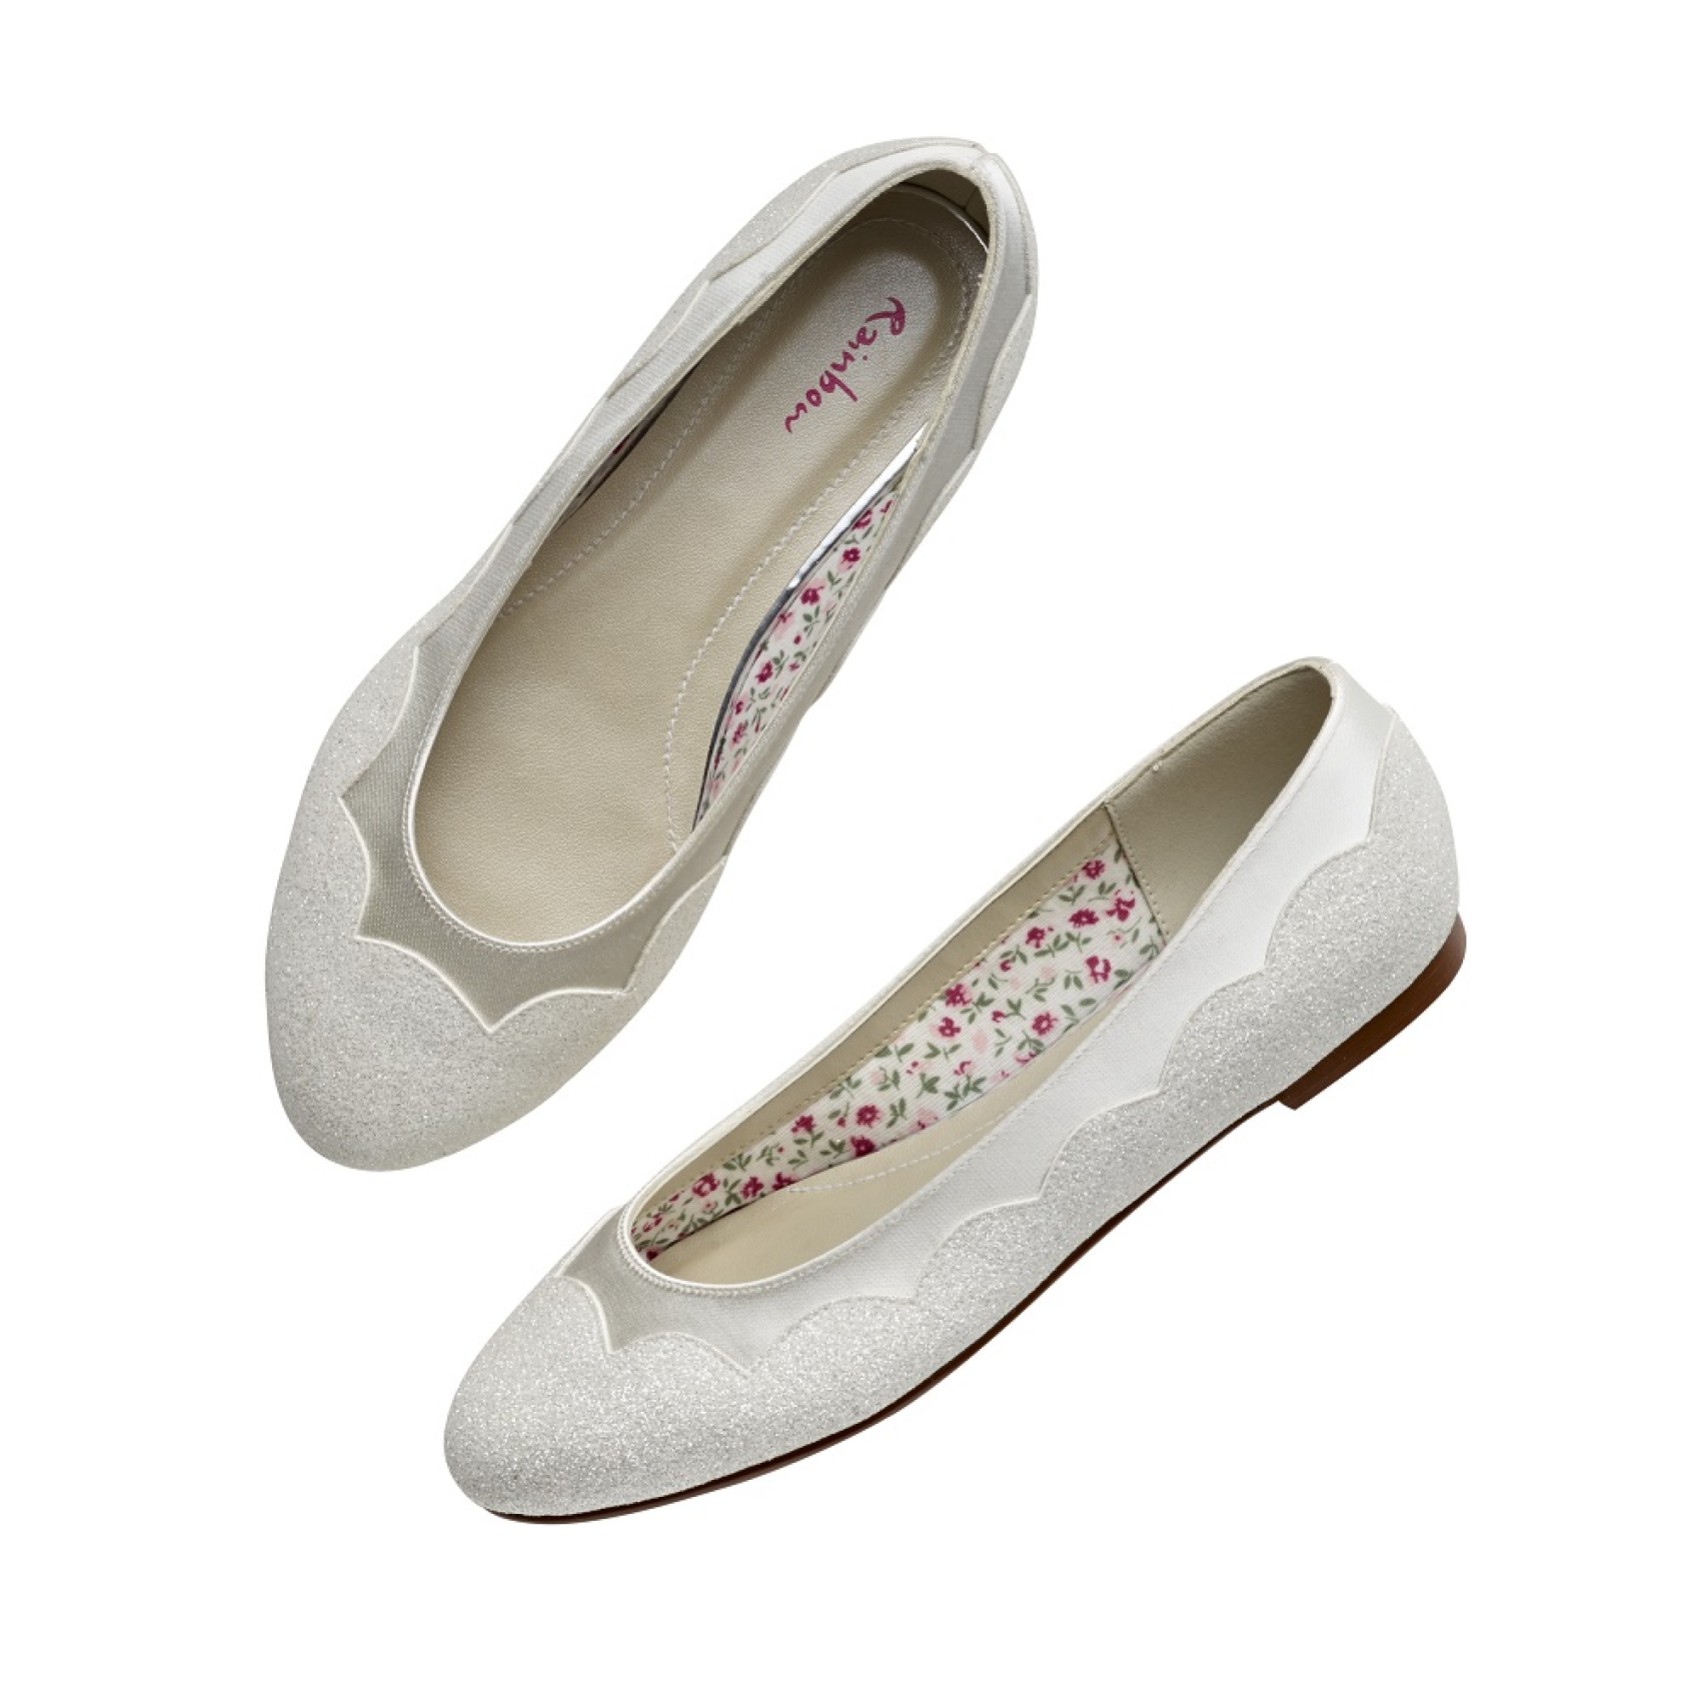 Rainbow Club Cecily Ivory Satin and Glitter Flat Ballet Pumps